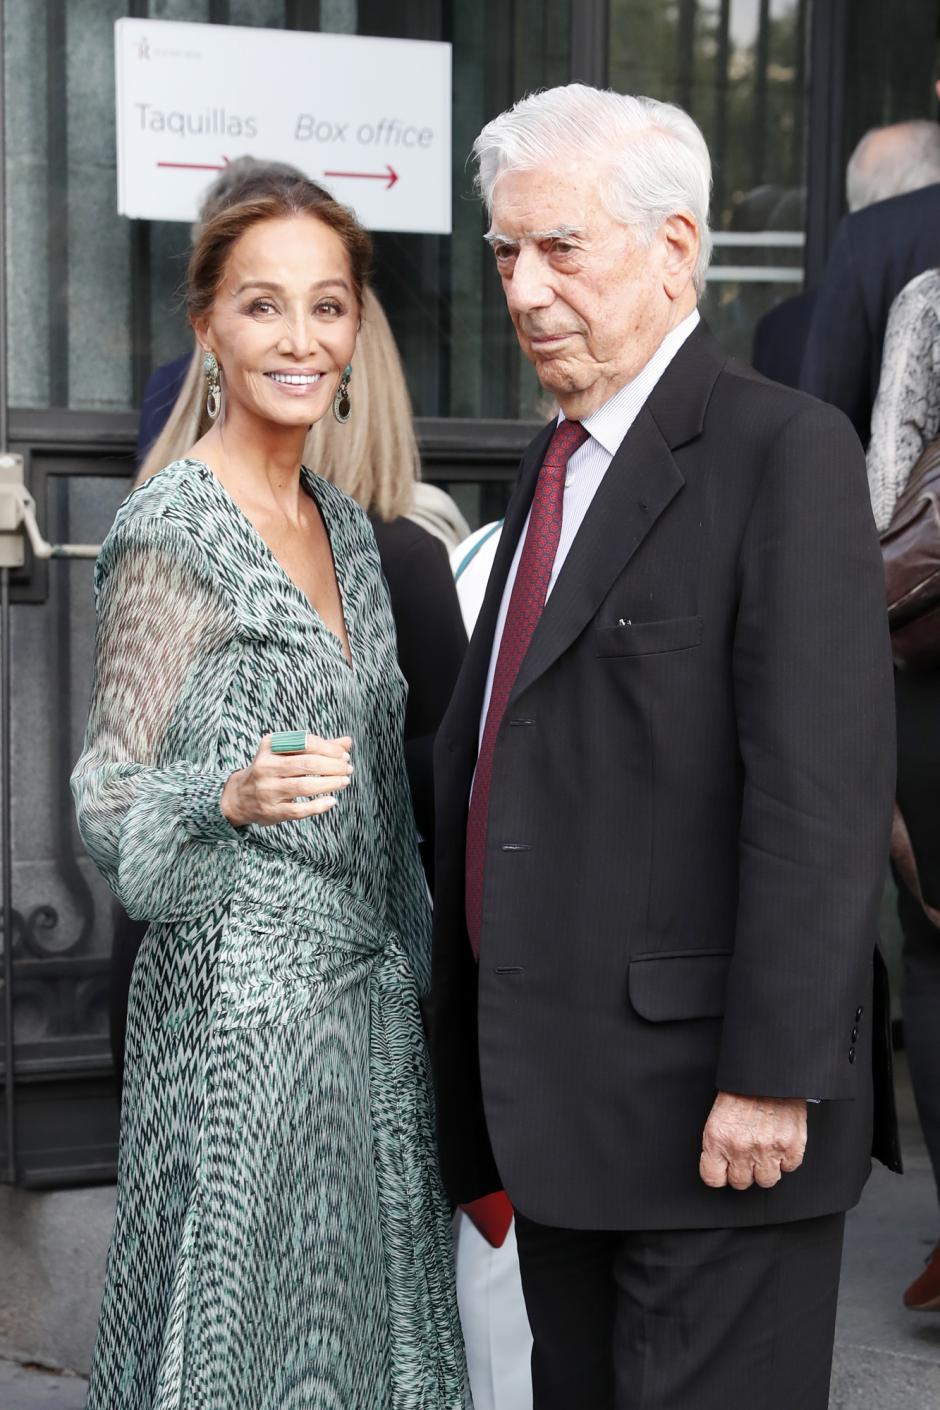 Isabel Preysler and Mario Vargas Llosa attending the opening of the season of the Royal Theatre 2019 / 2020 in Madrid on Wednesday , 18 September 2019.